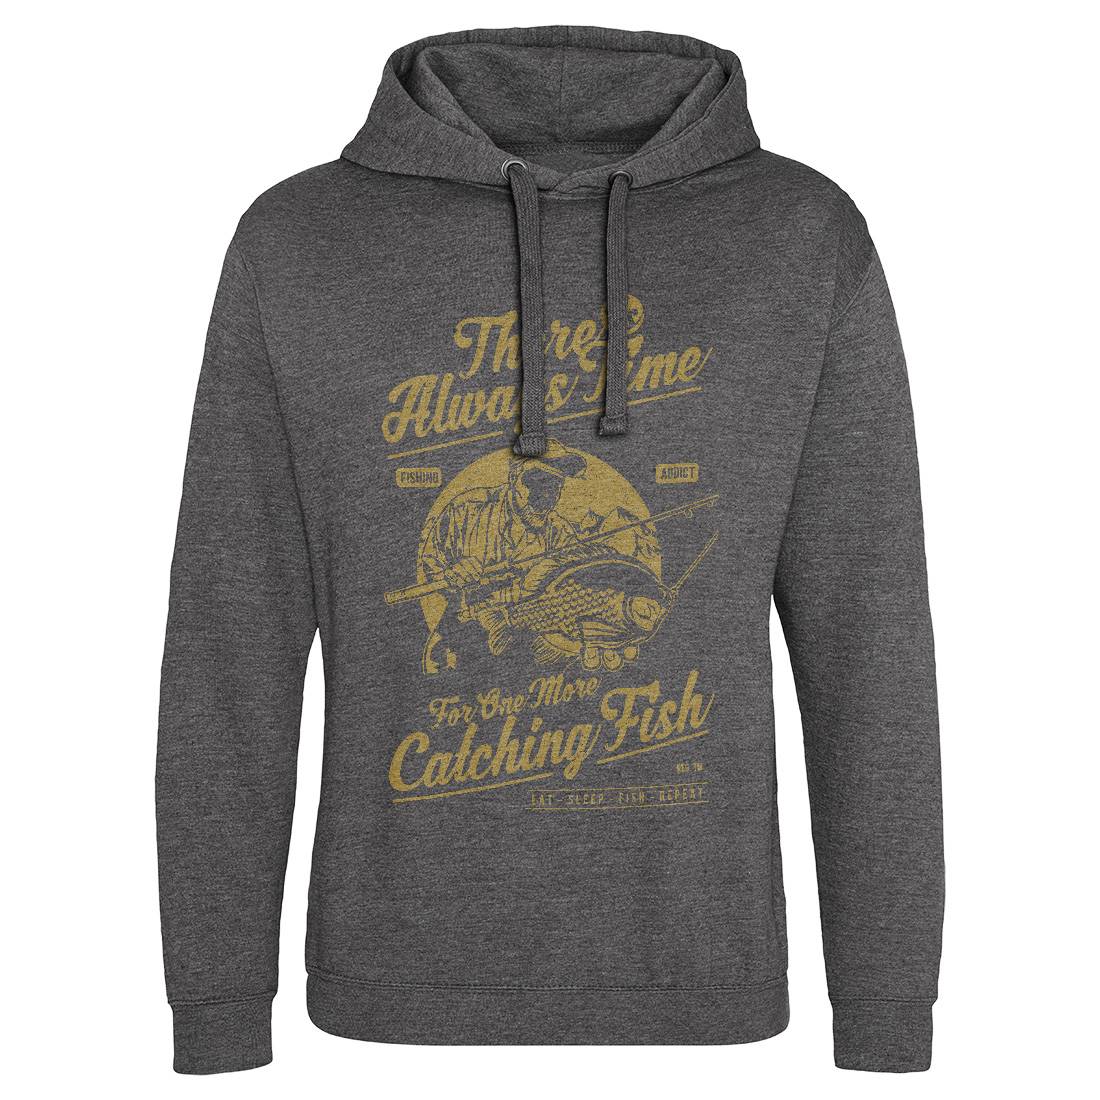 One More Catching Mens Hoodie Without Pocket Fishing A731